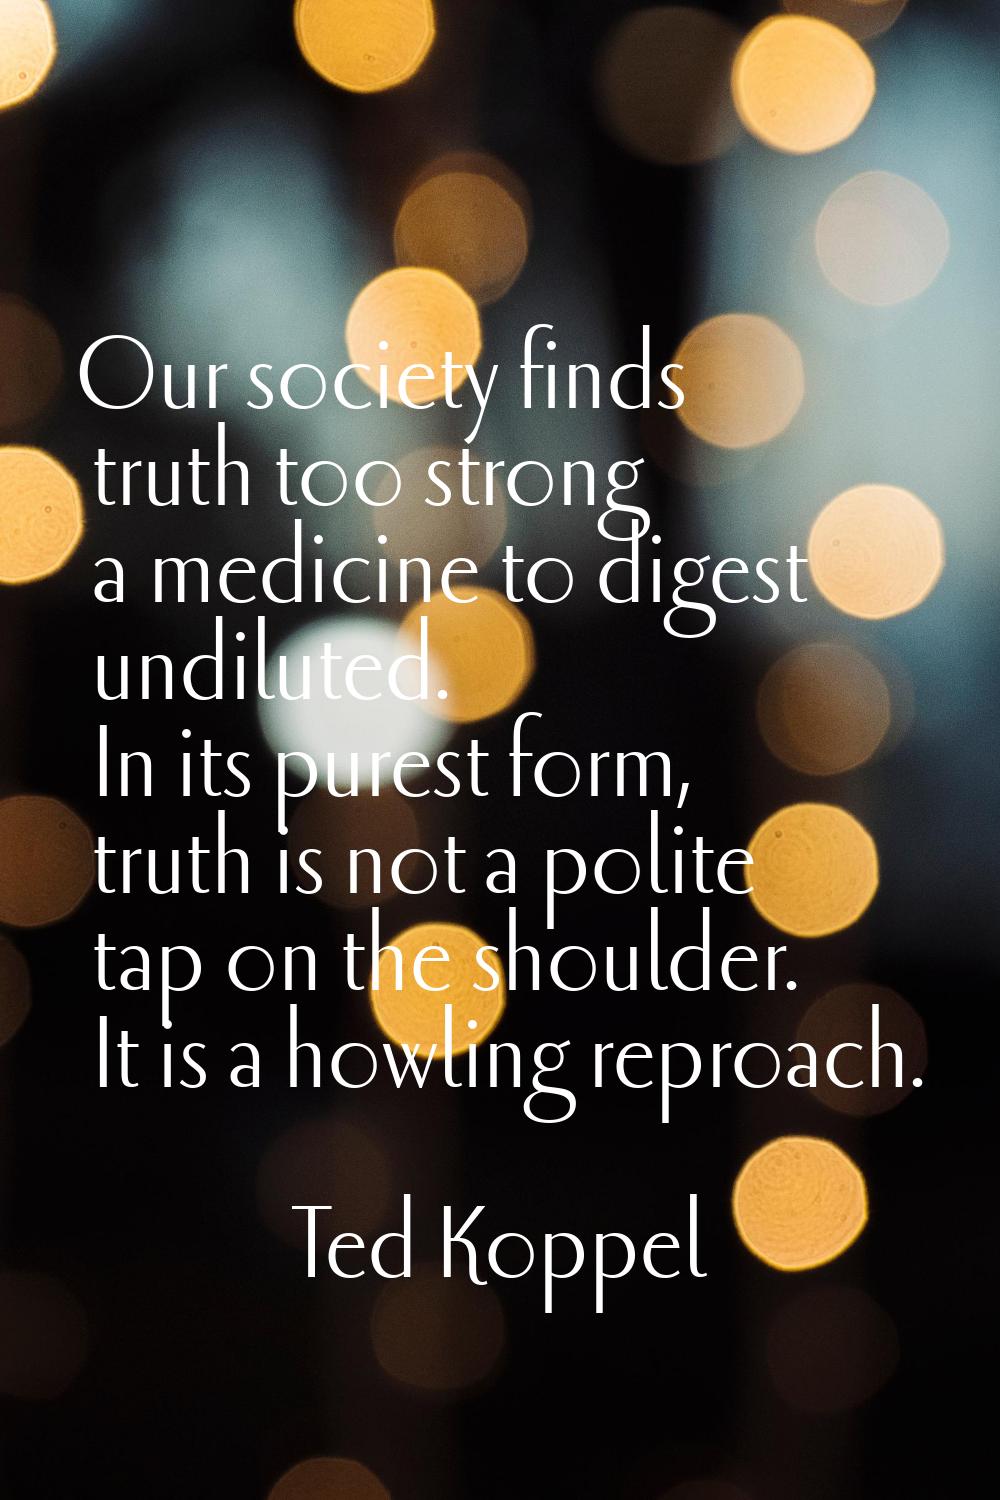 Our society finds truth too strong a medicine to digest undiluted. In its purest form, truth is not